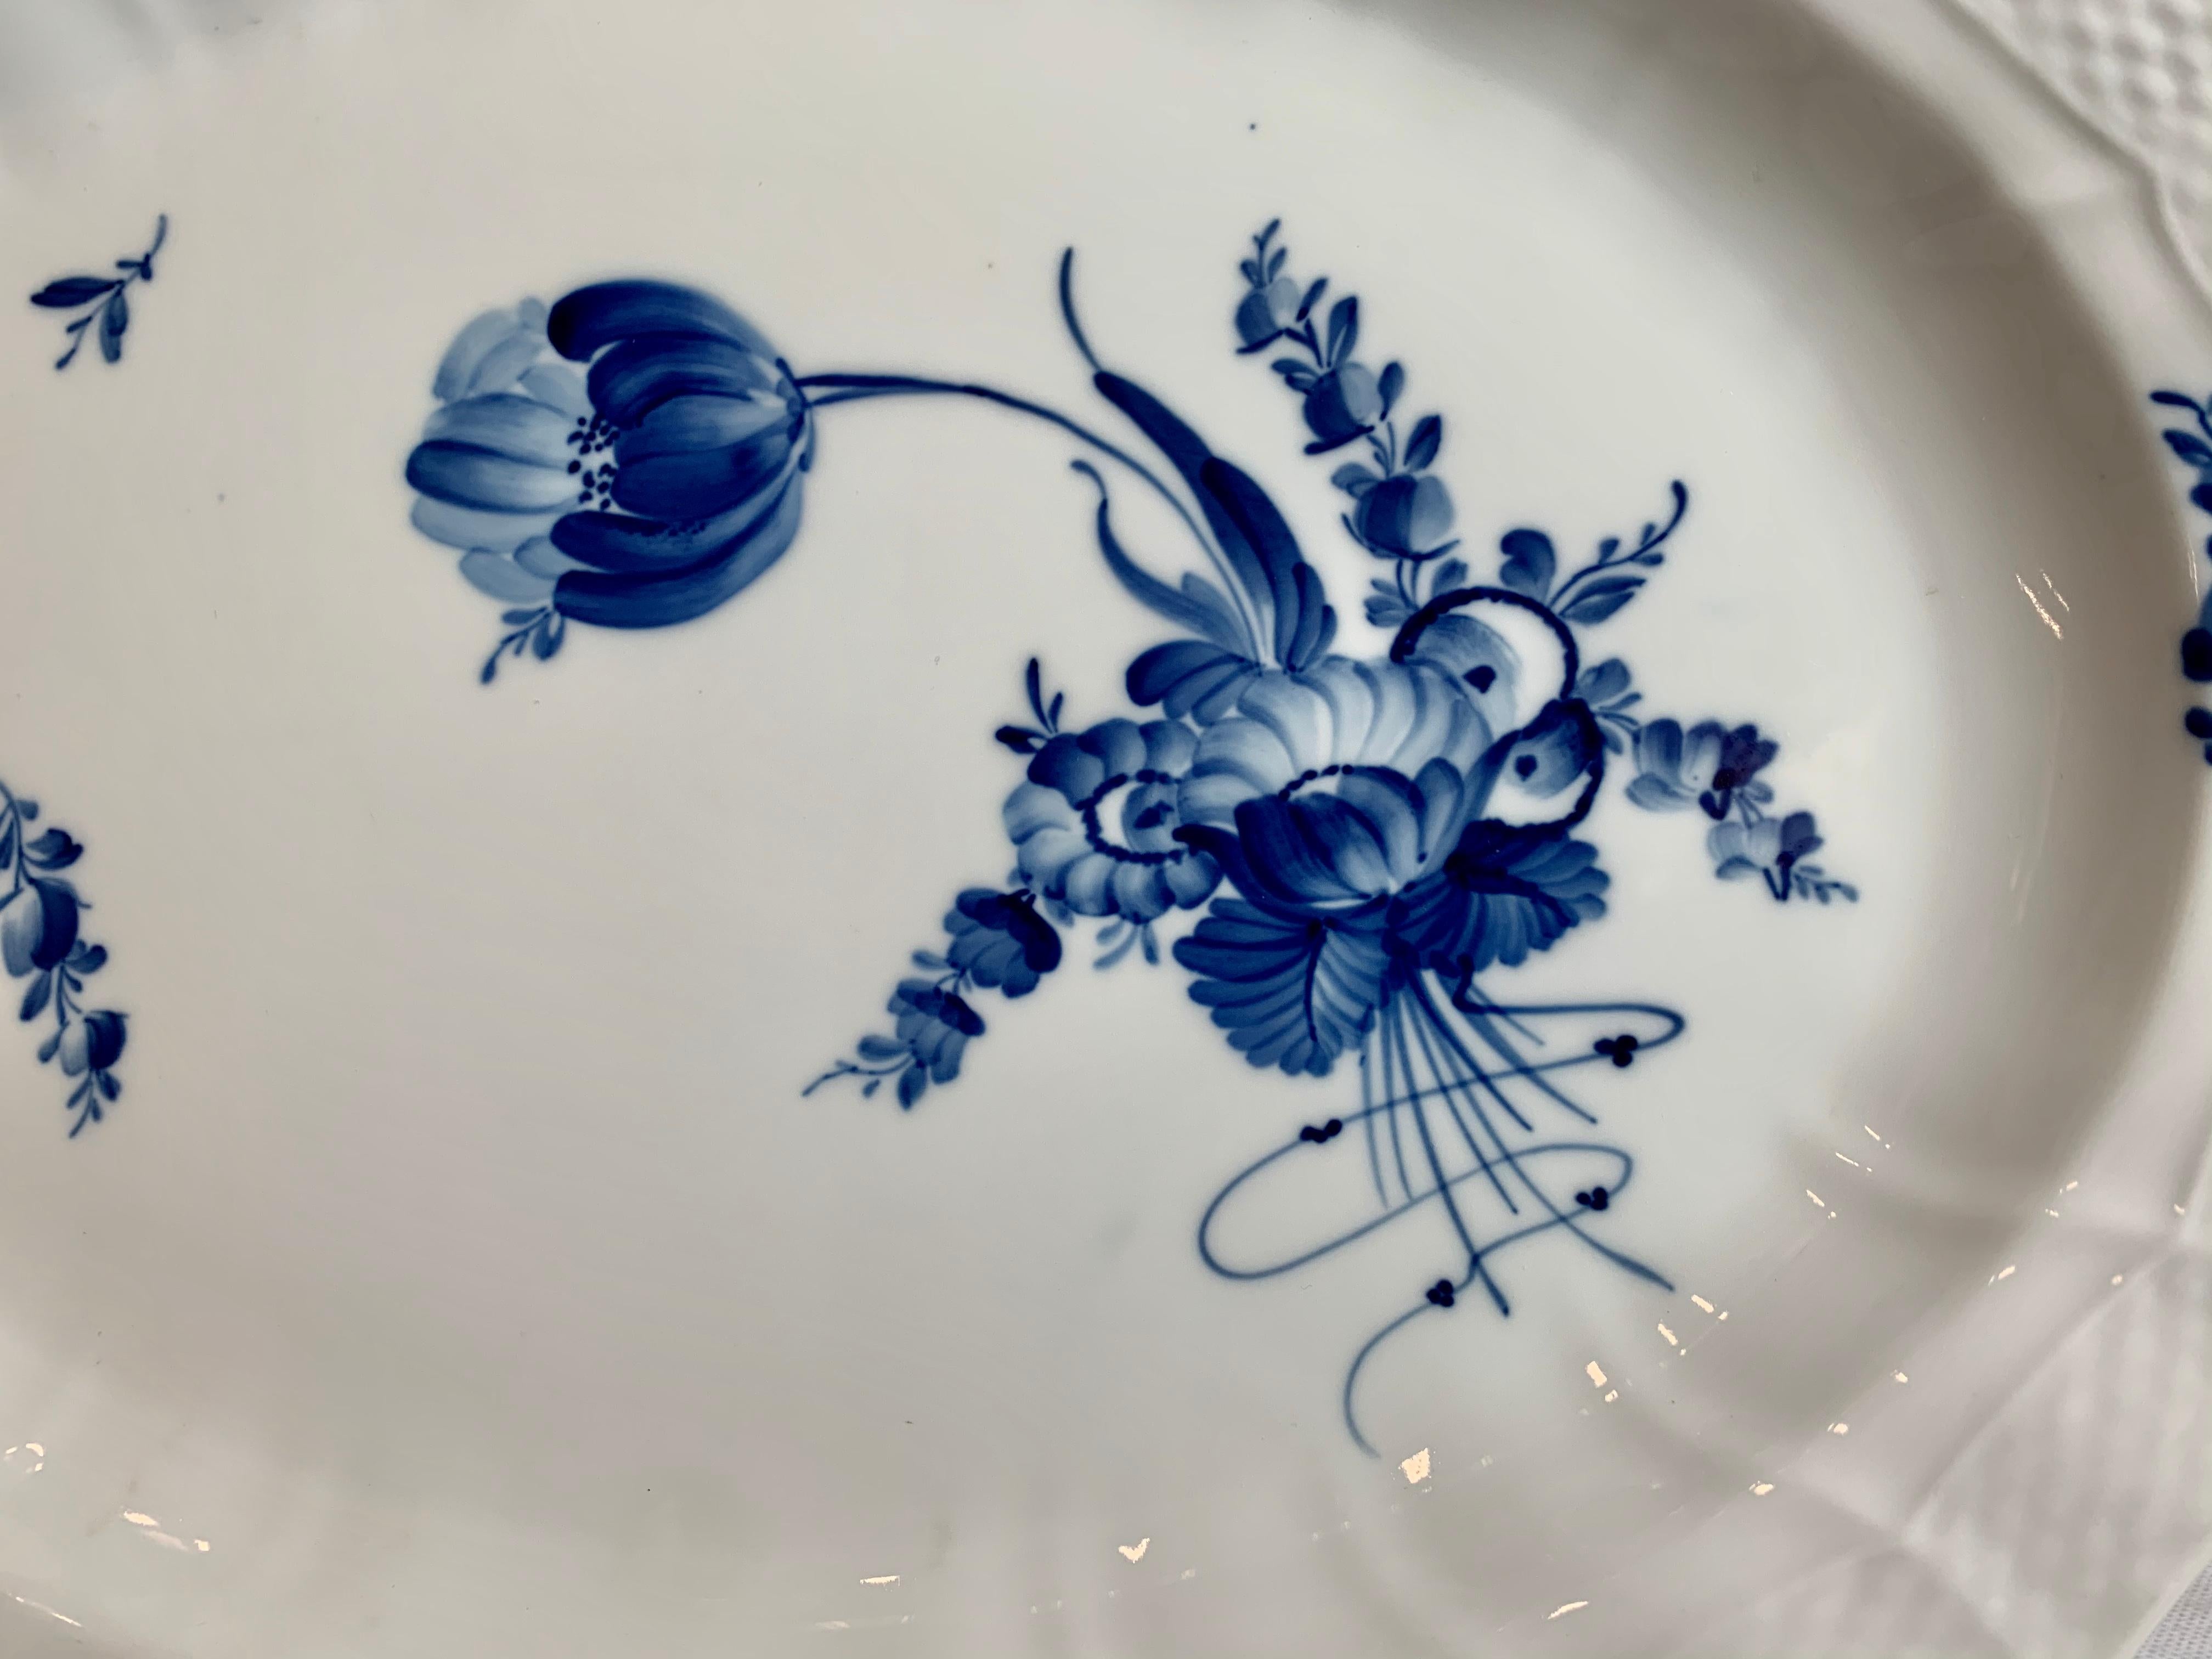 This large porcelain platter by Royal Copenhagen in the Rococo style is referred to as Blue Flower-Curve. It was hand decorated in this dazzling cobalt blue. The 